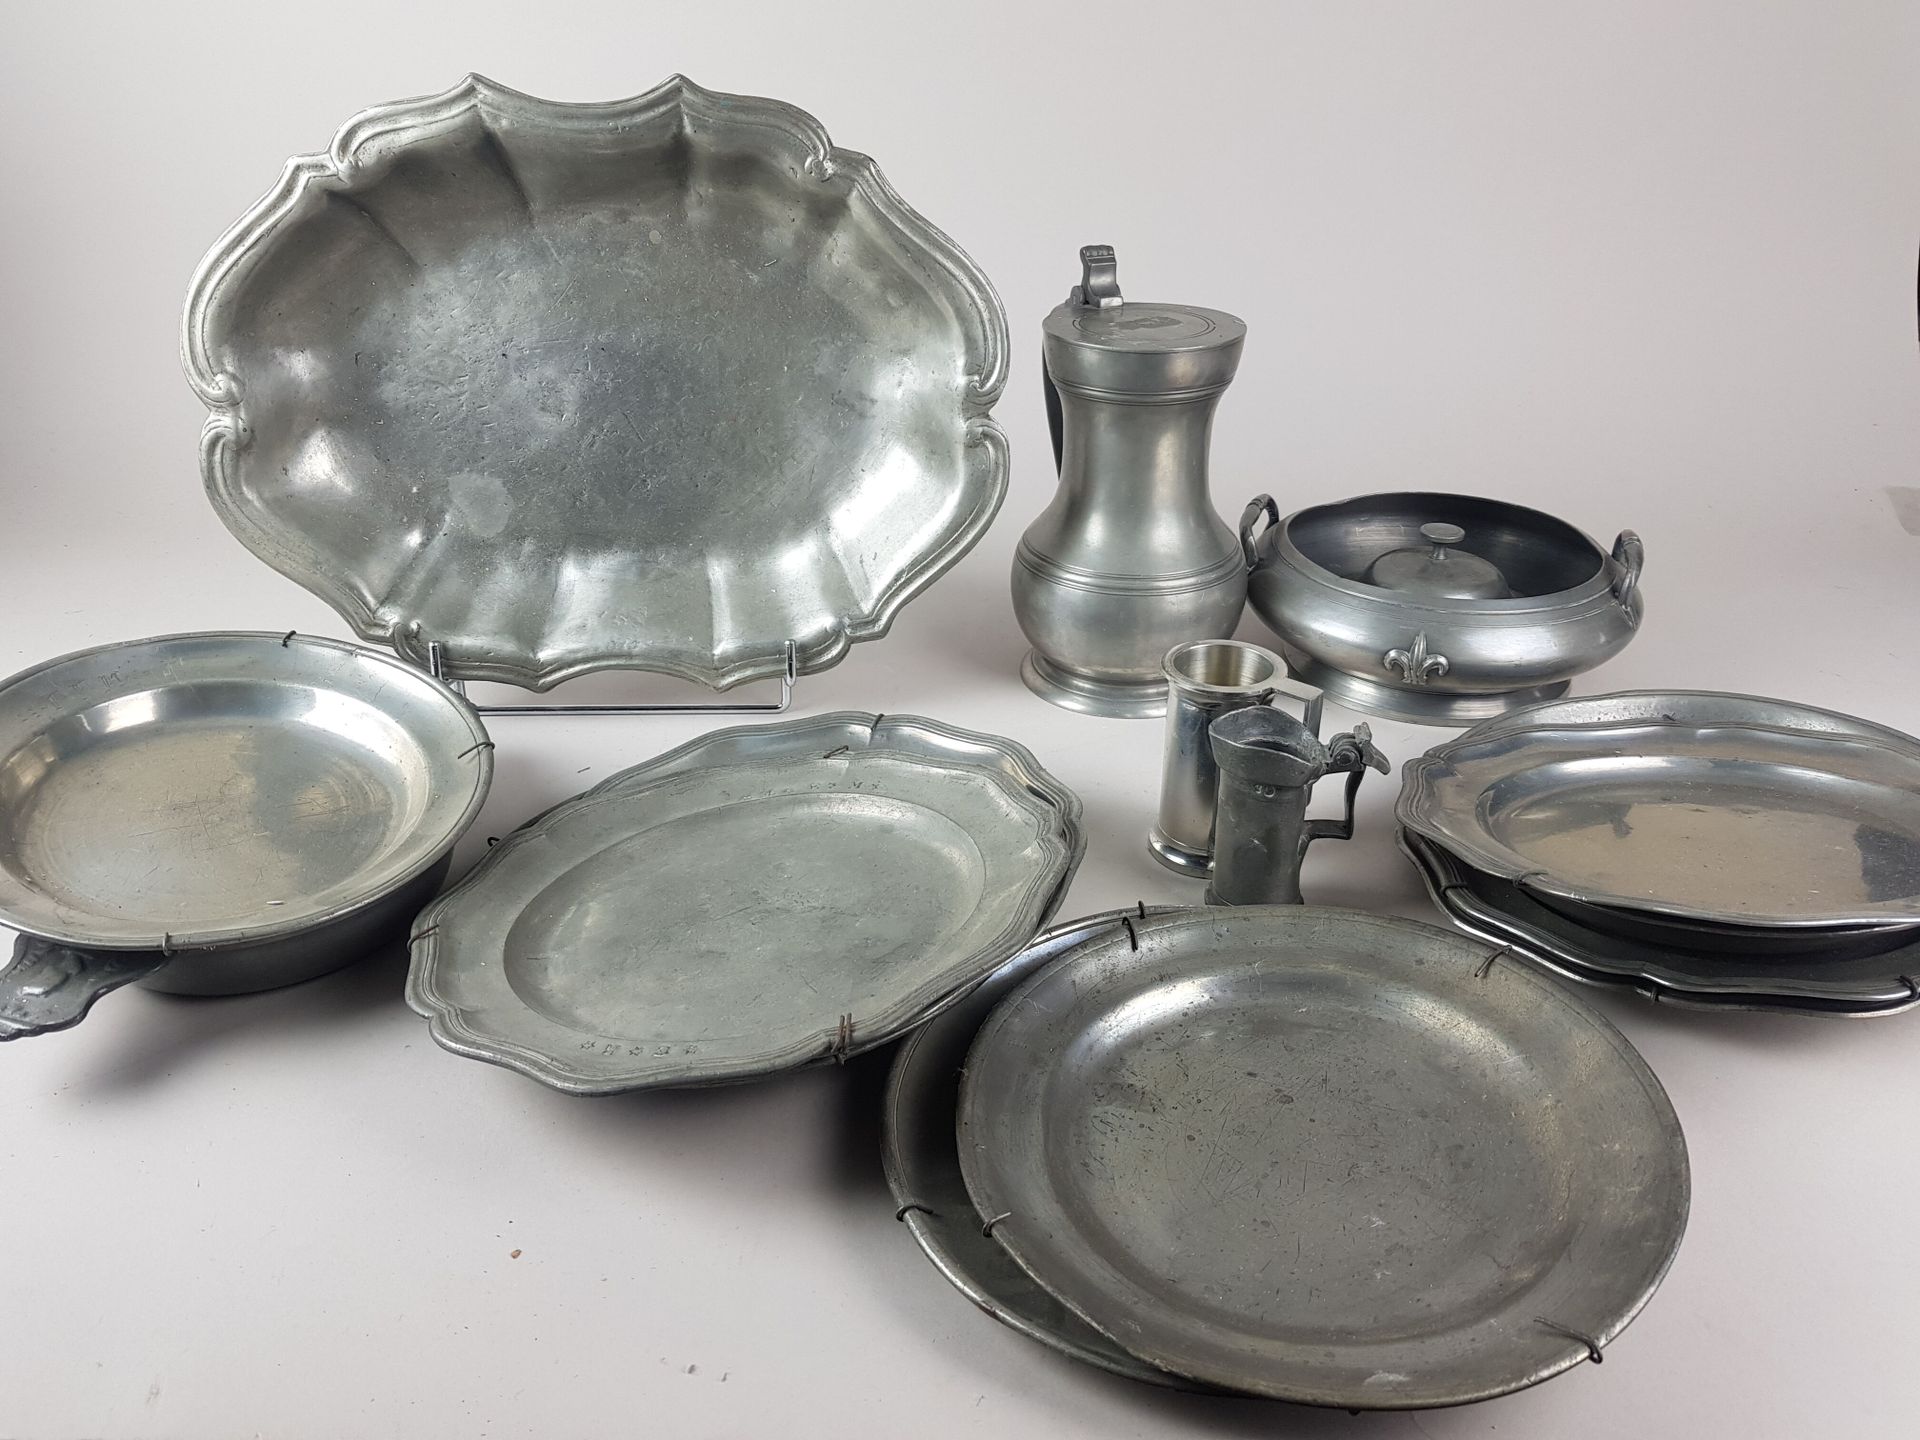 Null LOT of pewter including a pitcher, plates, dish and various - wear of use